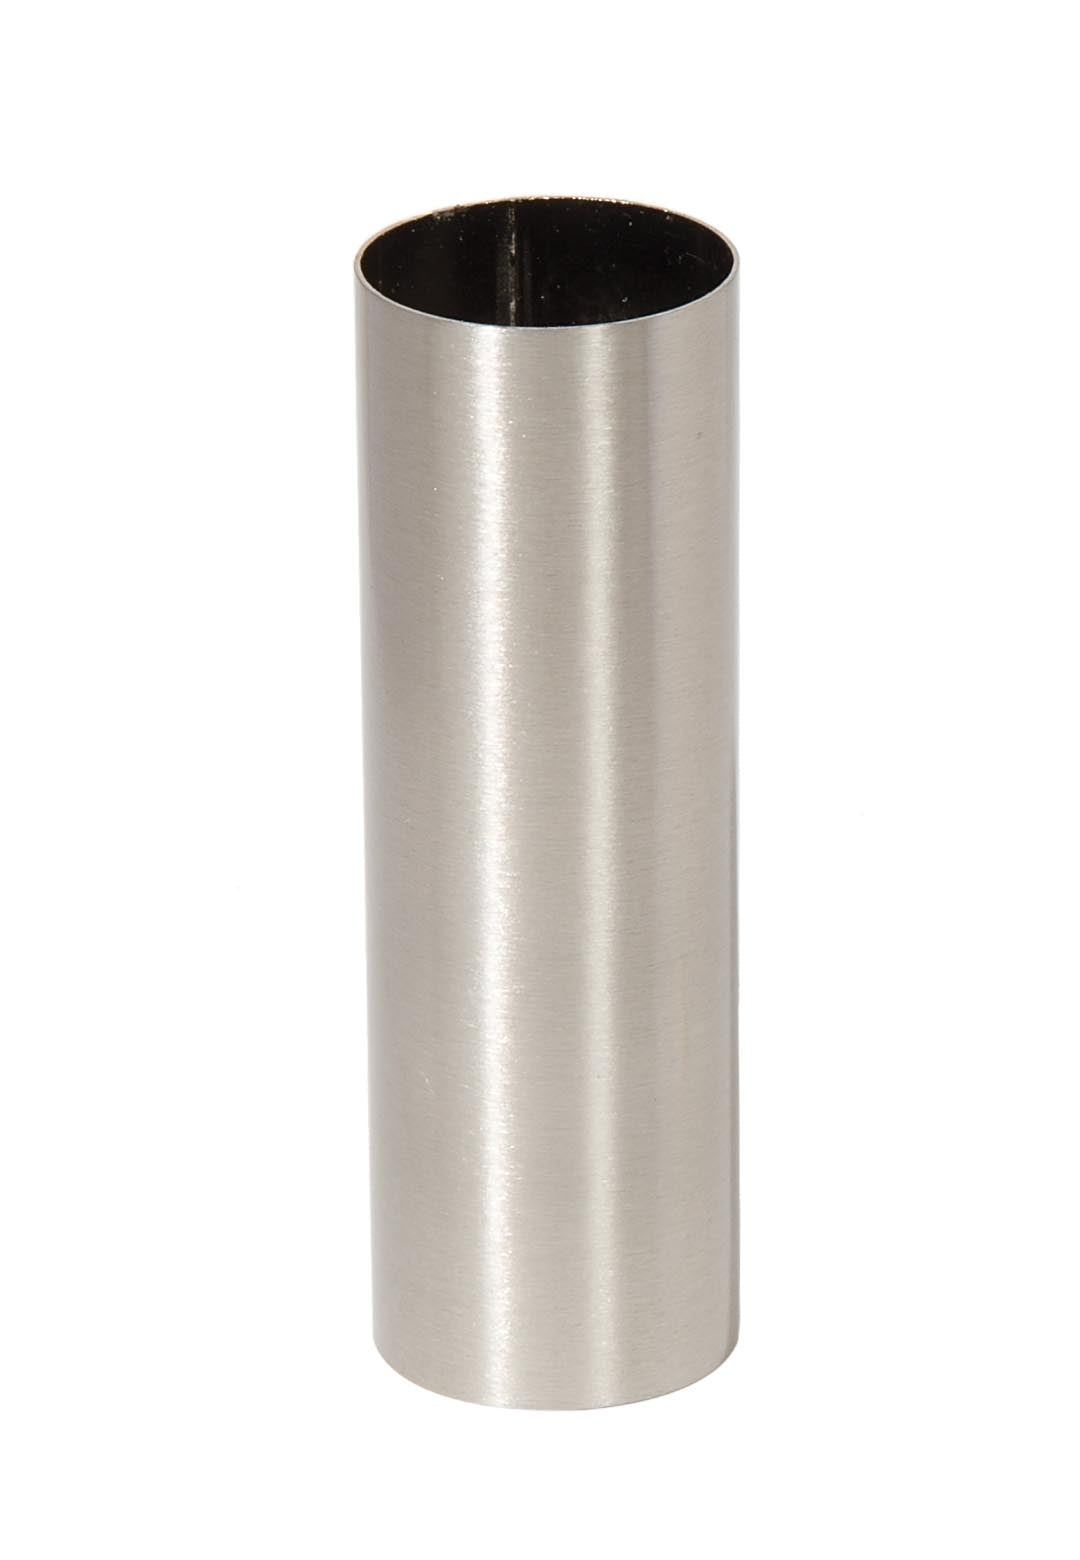 Seamless Satin Nickel Steel Medium Sized Candle Cover, Choice of Size